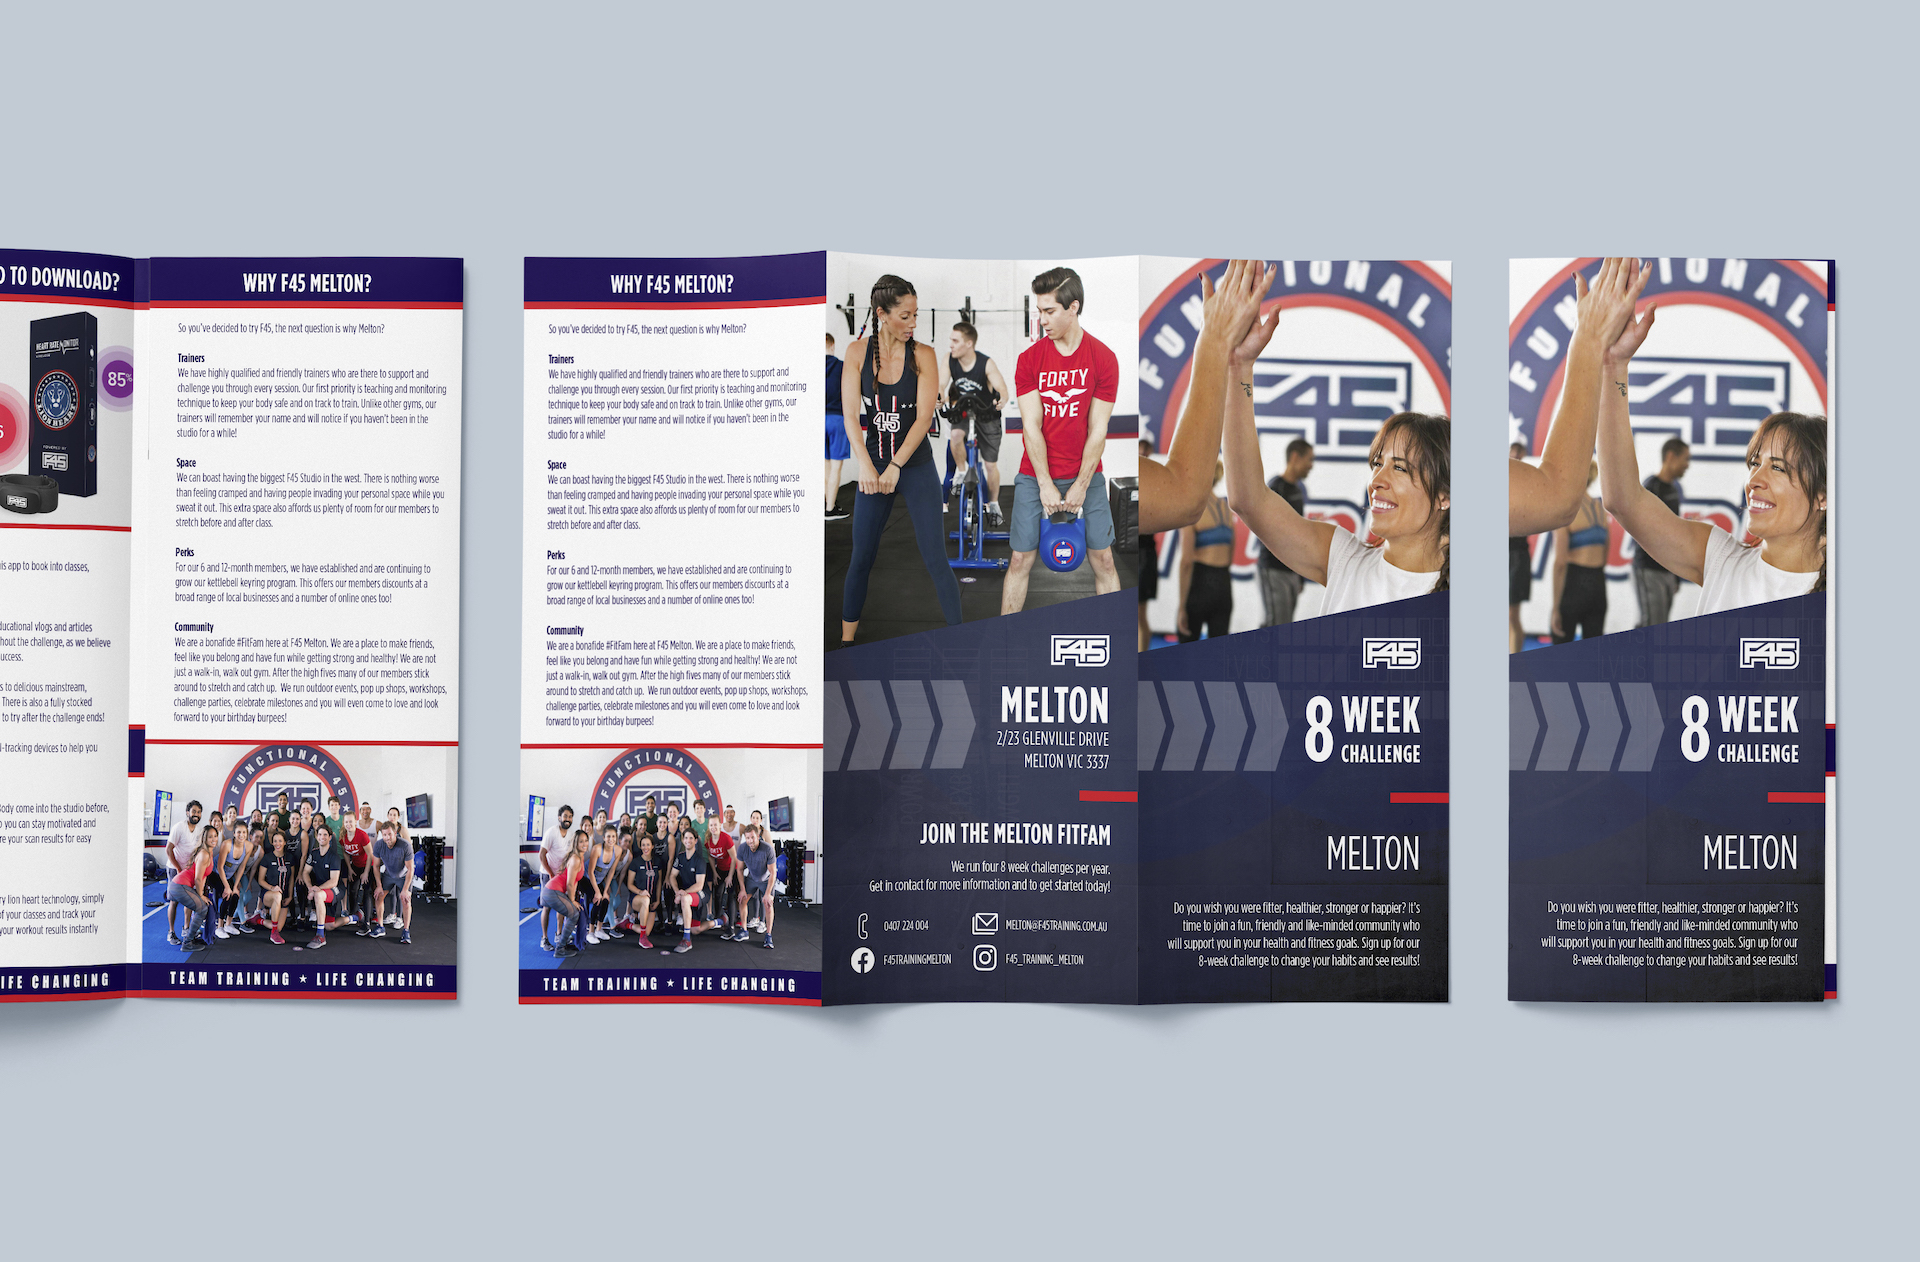 Tri-fold Brochure for F45 Training, Designed by Spacey Studios